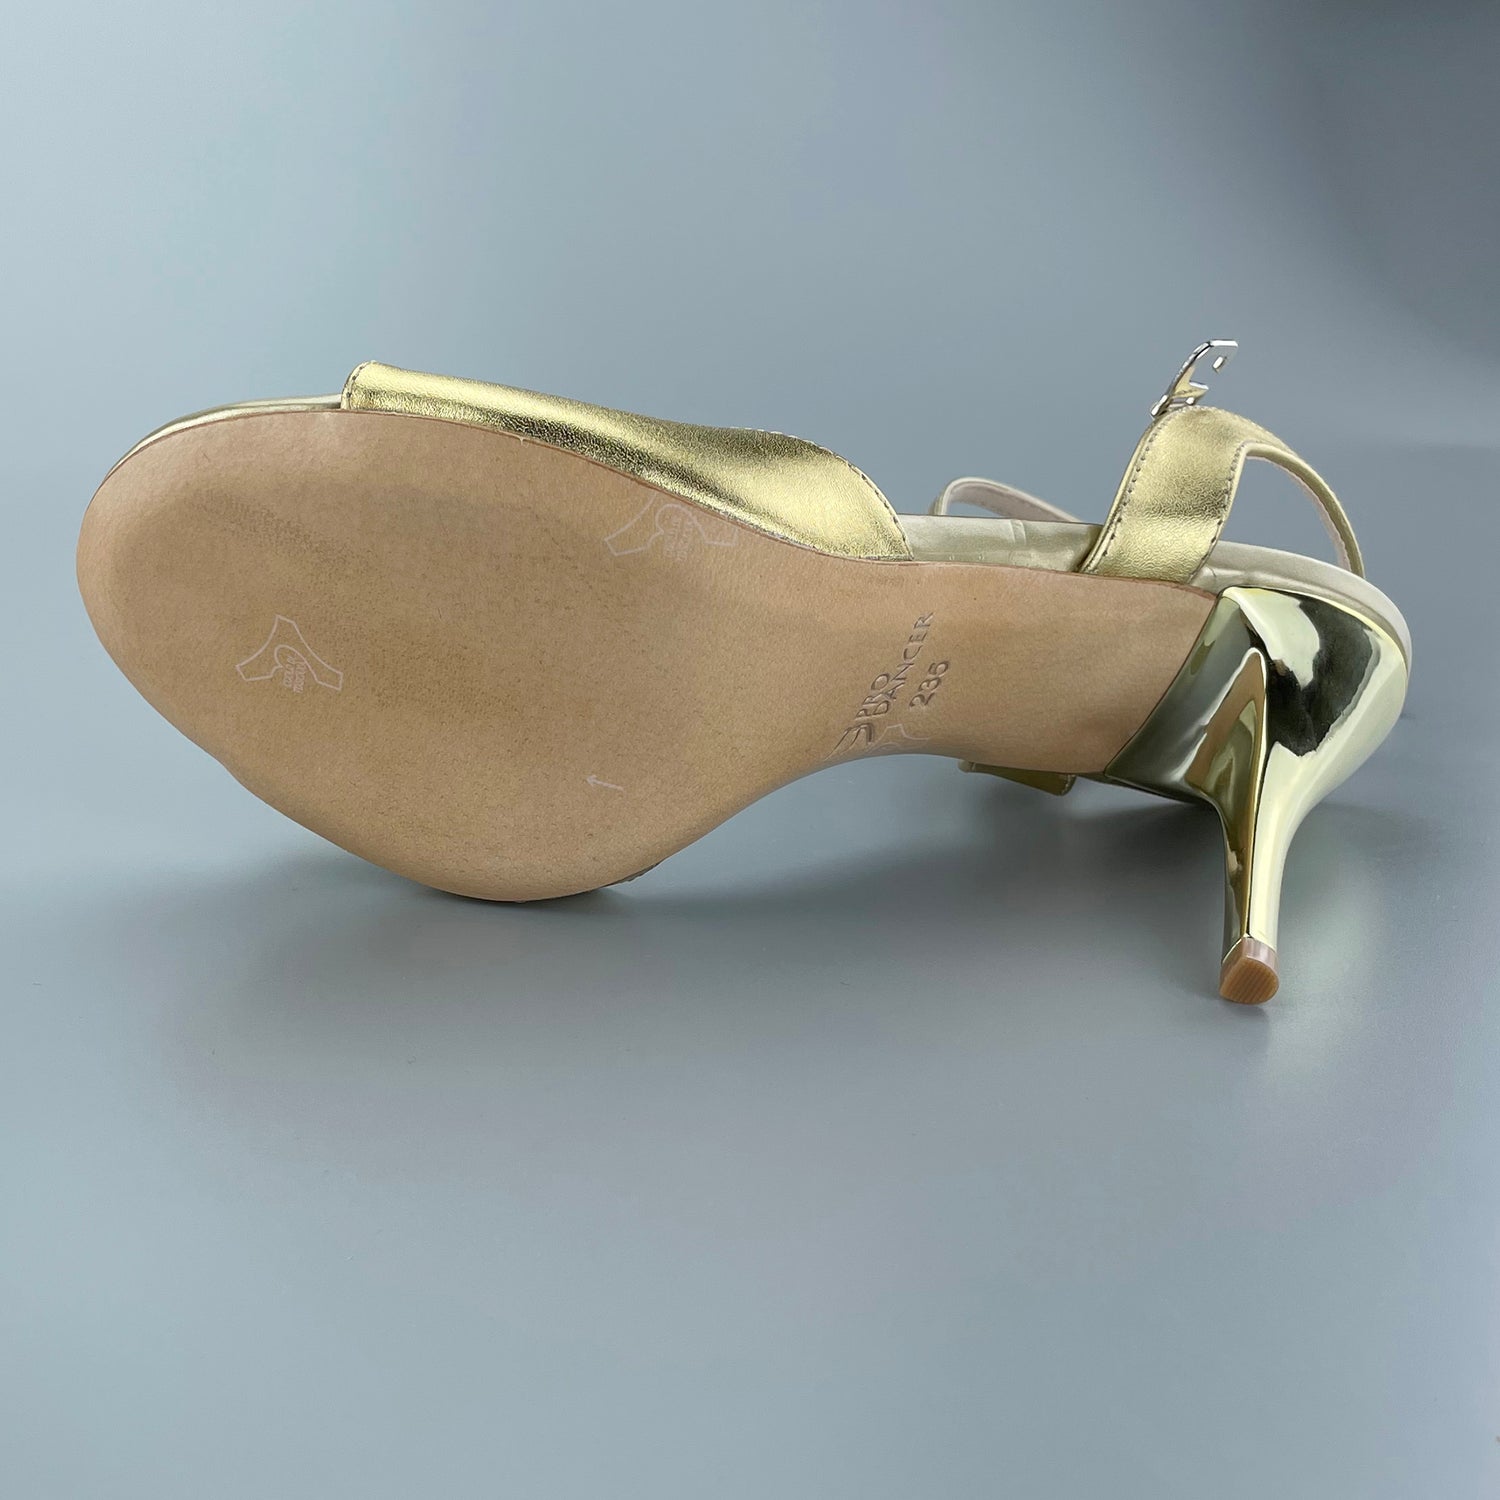 Gold Pro Dancer Tango Shoes open-toe high heels with hard leather sole5